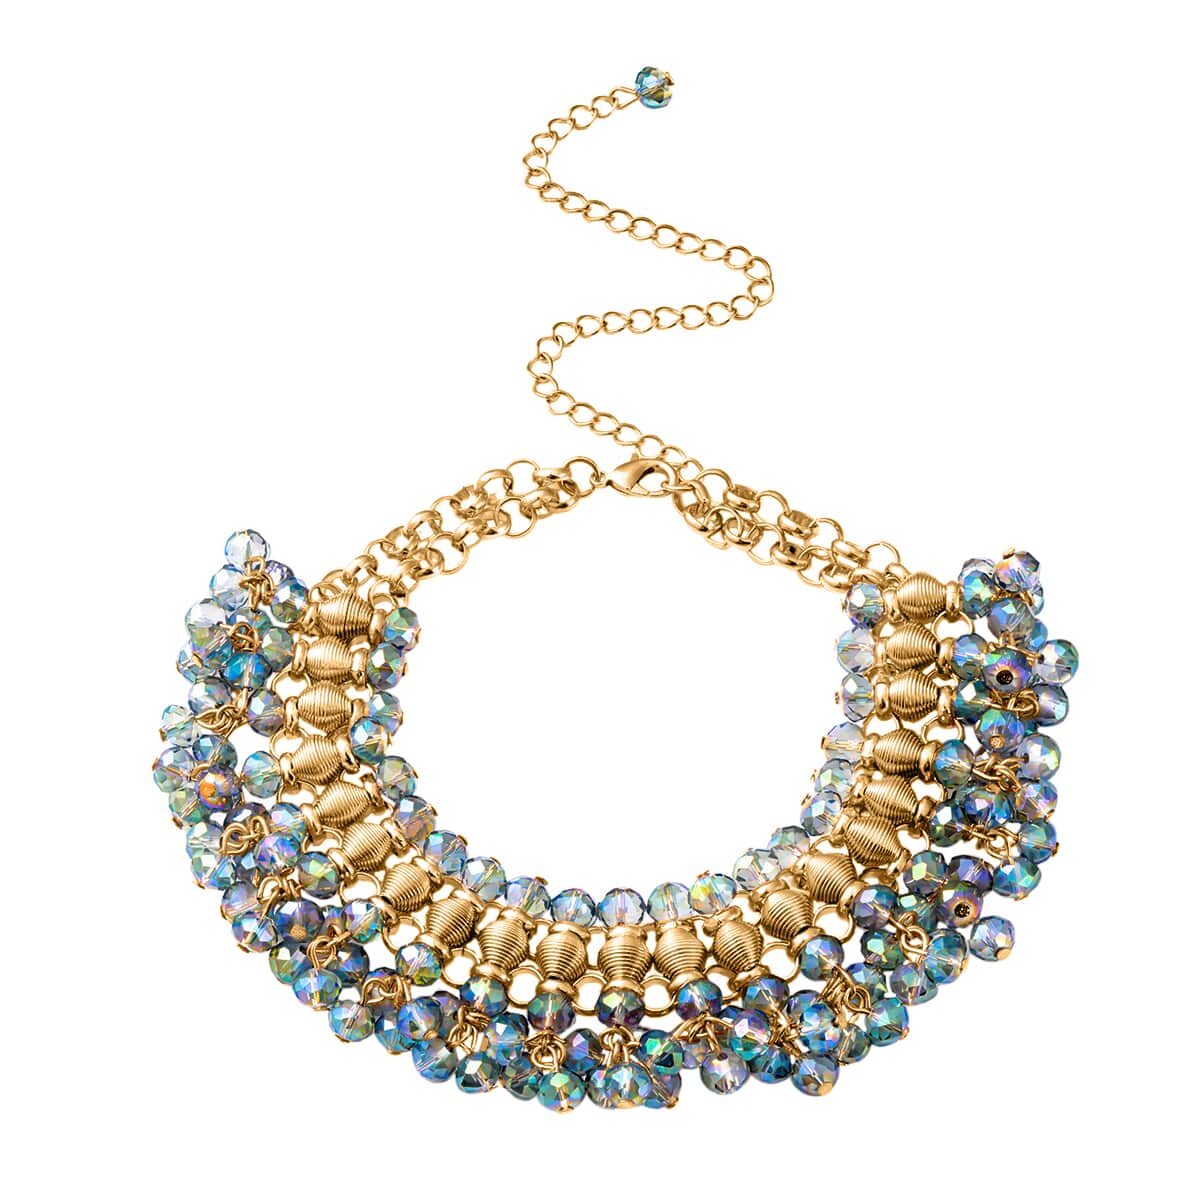 Peacock Color Bib Necklace in Goldtone, Bead Necklace, Waterfall Necklace (13-19 in) image number 0